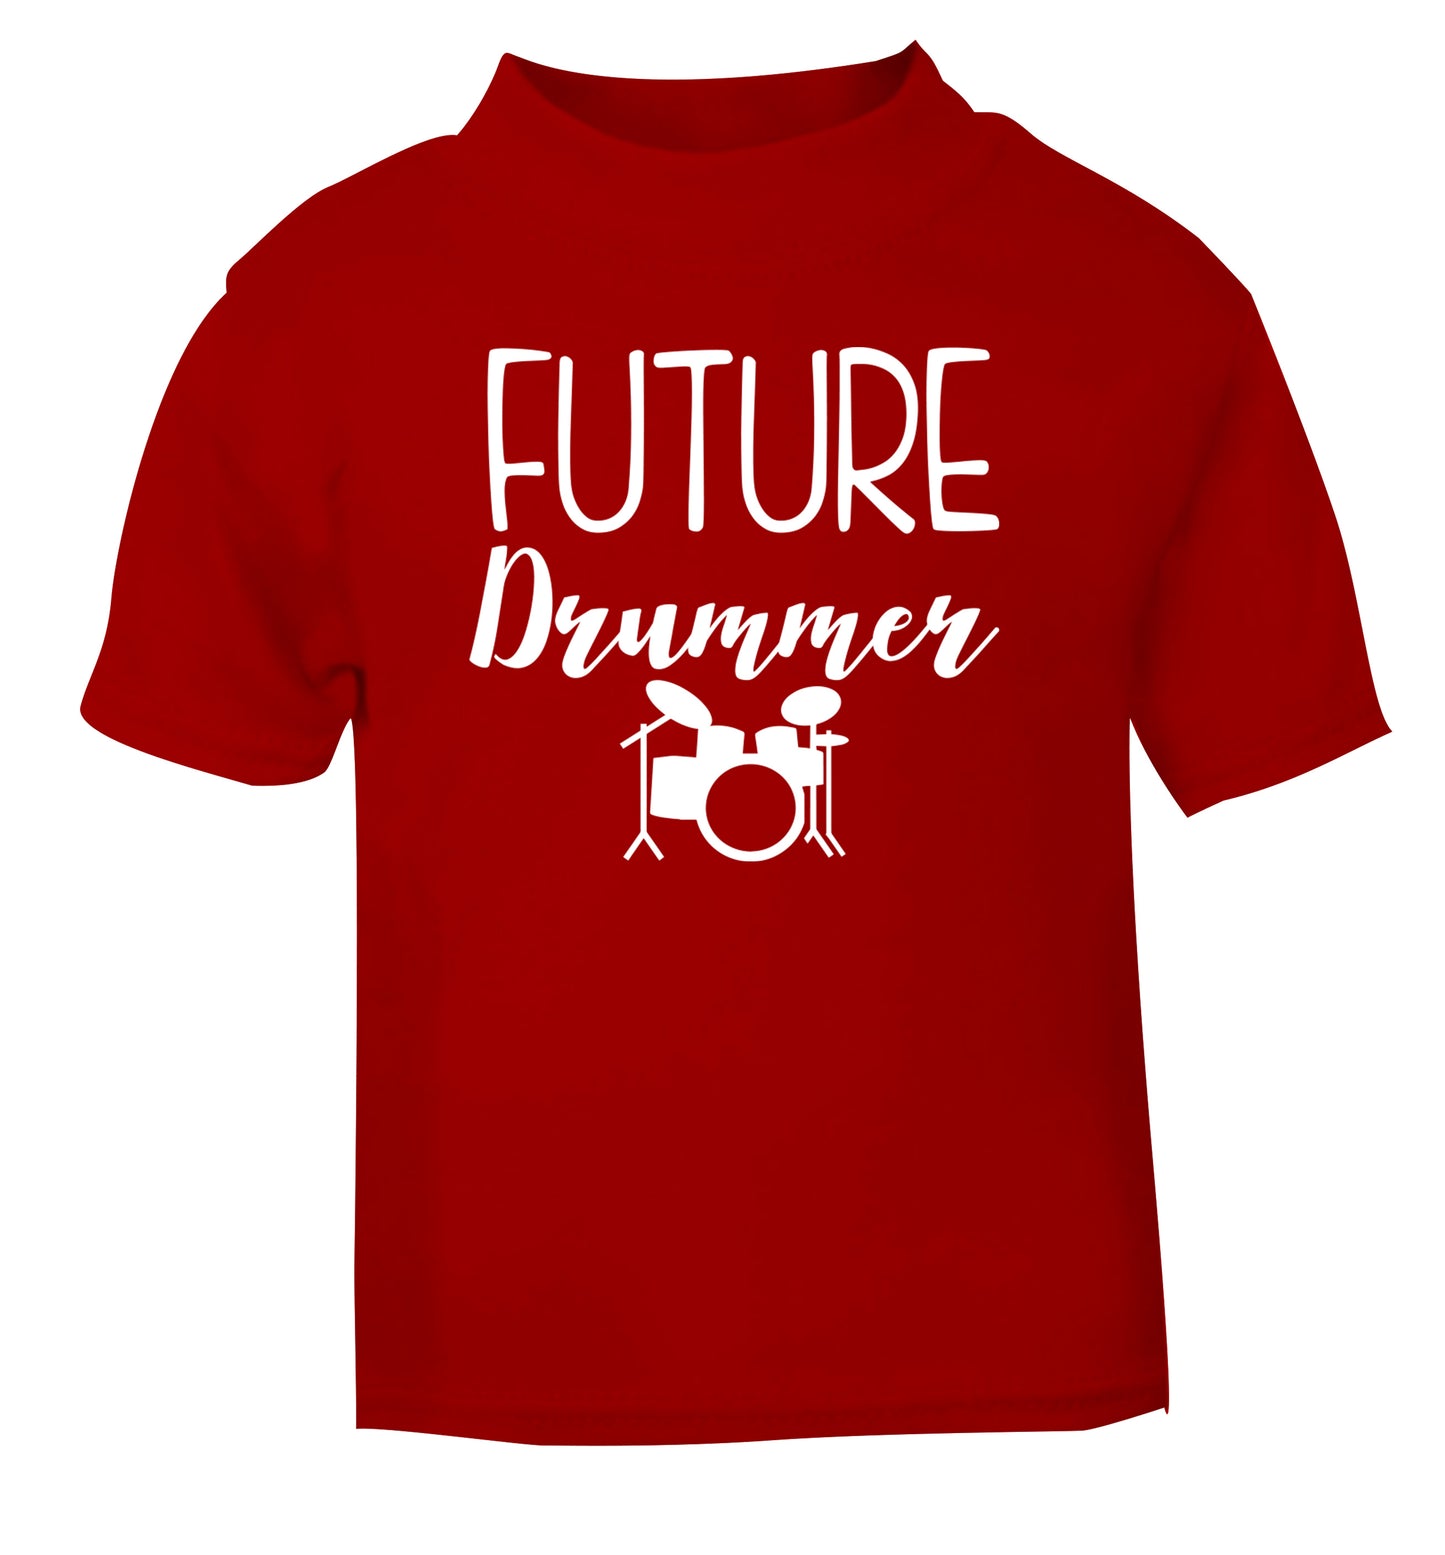 Future drummer red Baby Toddler Tshirt 2 Years